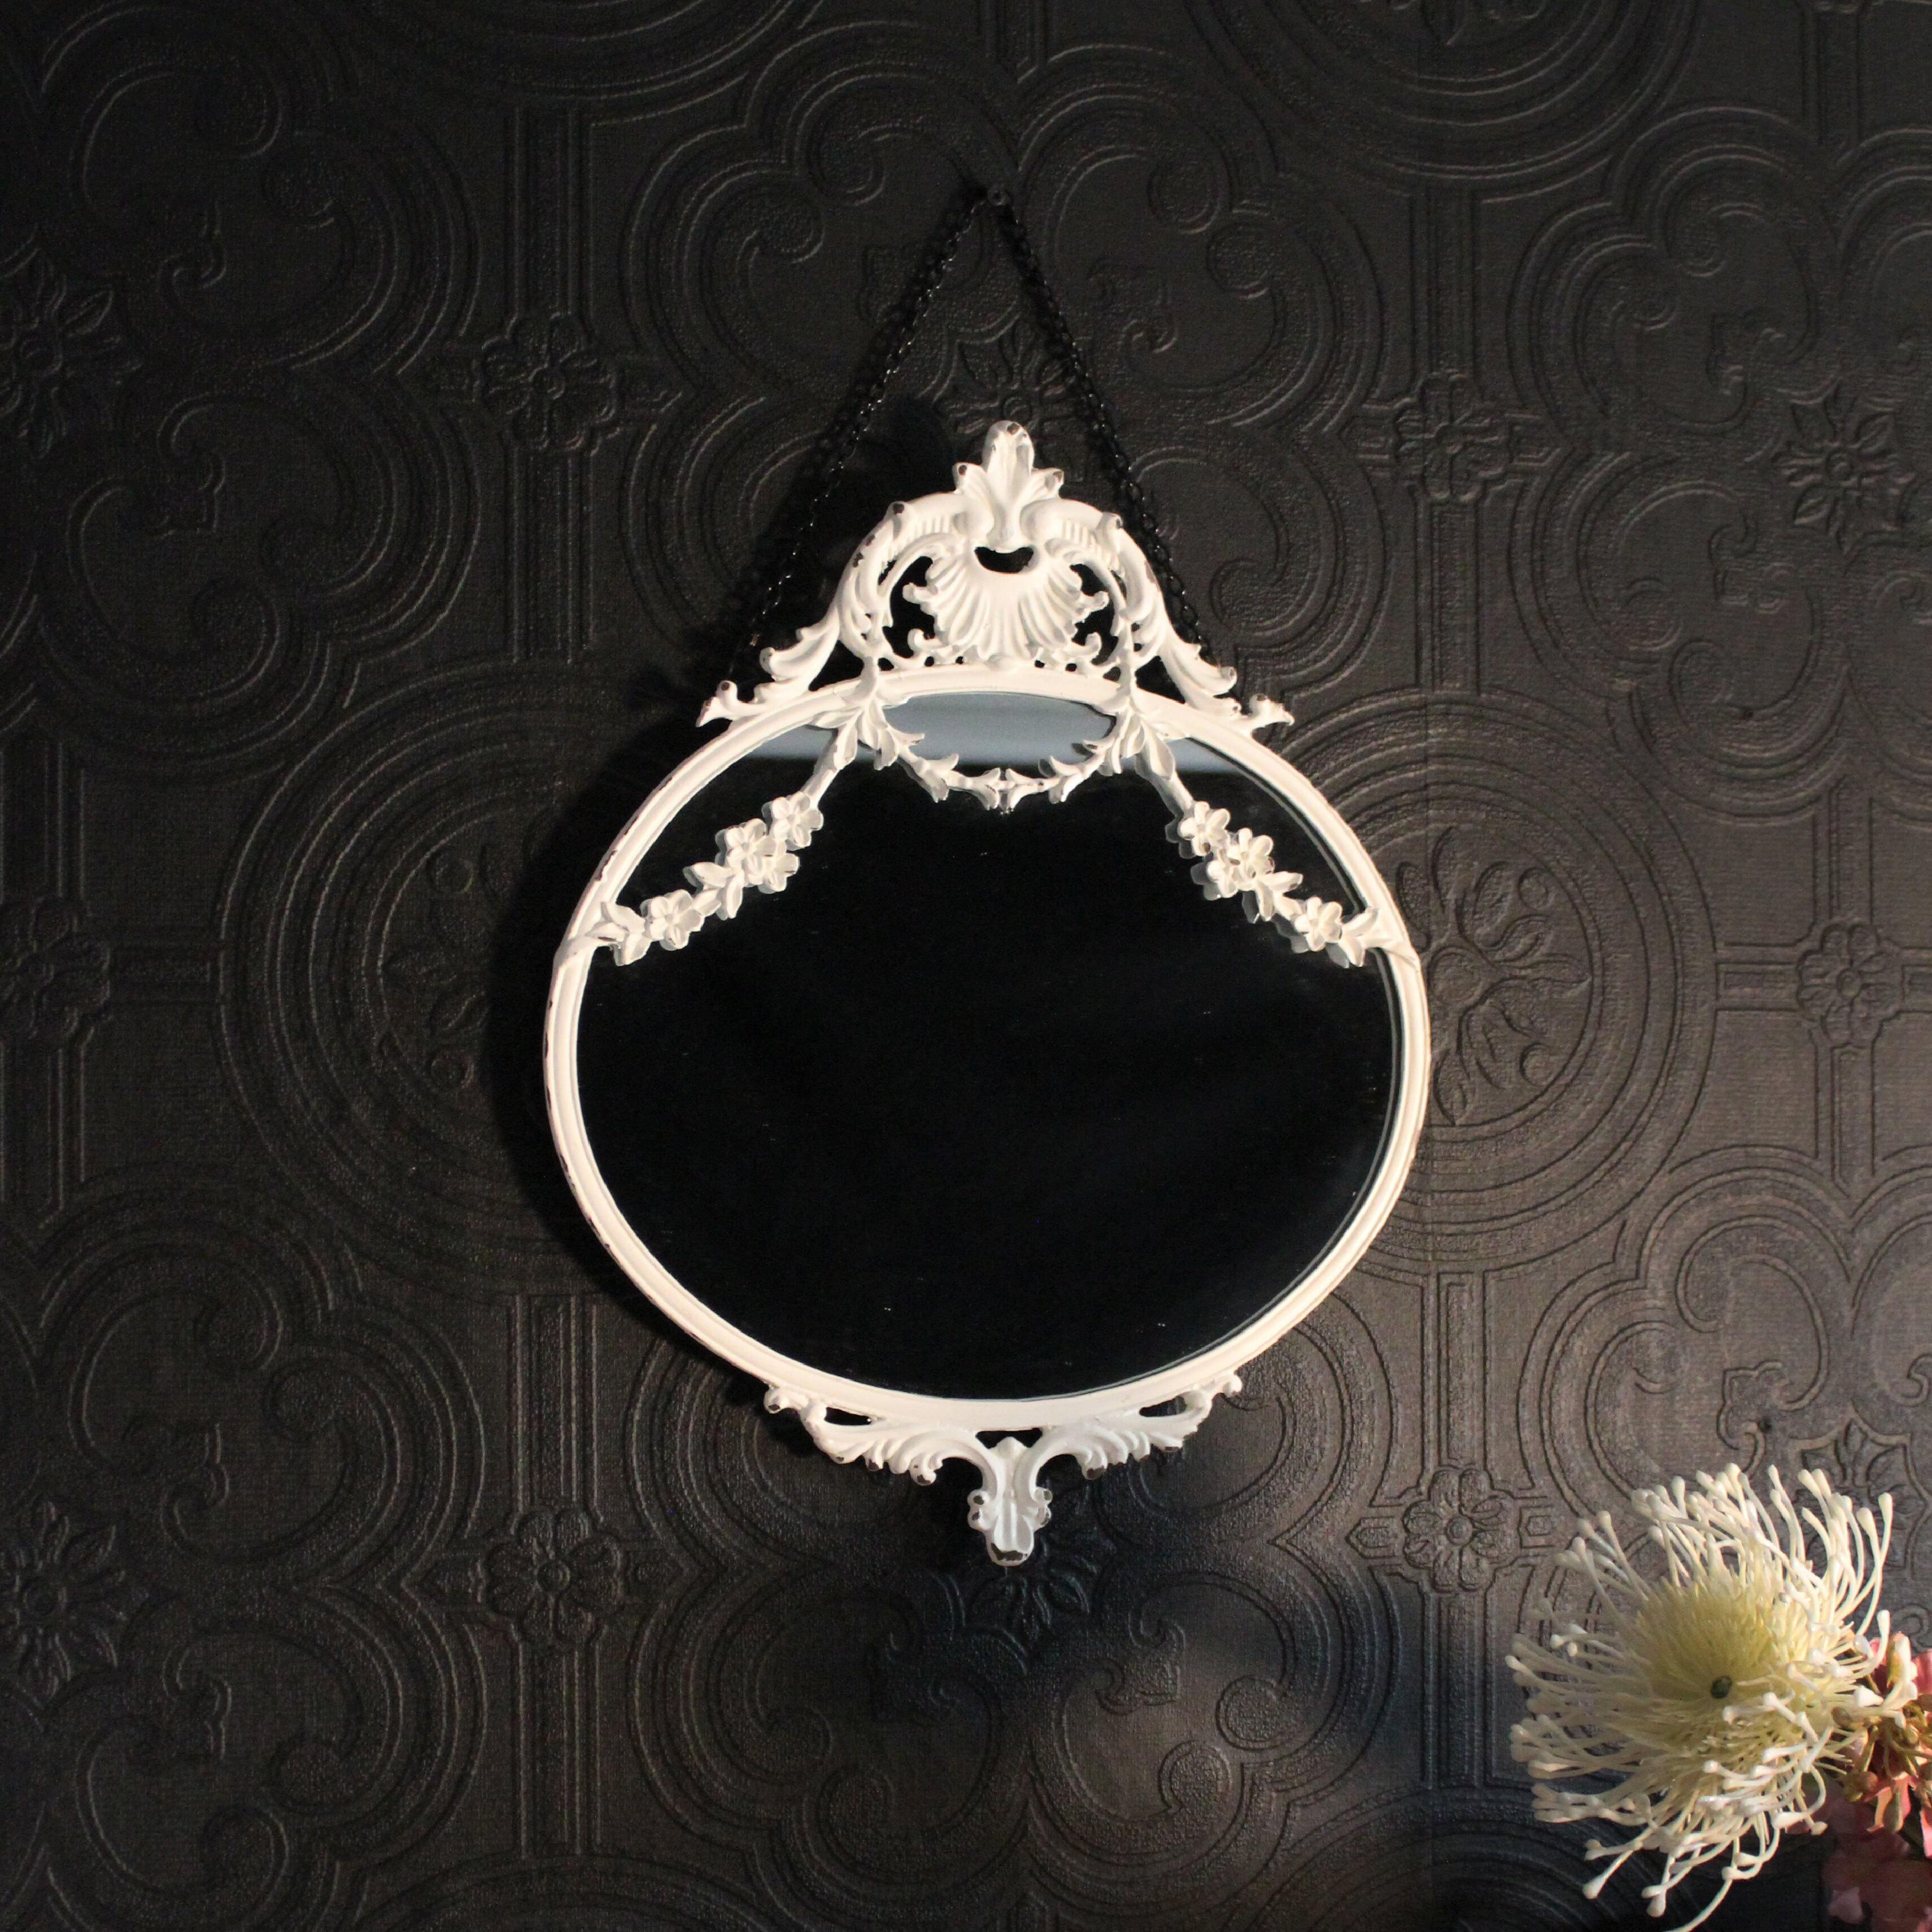 White Oval Baroque Mirror by The Blackened Teeth 